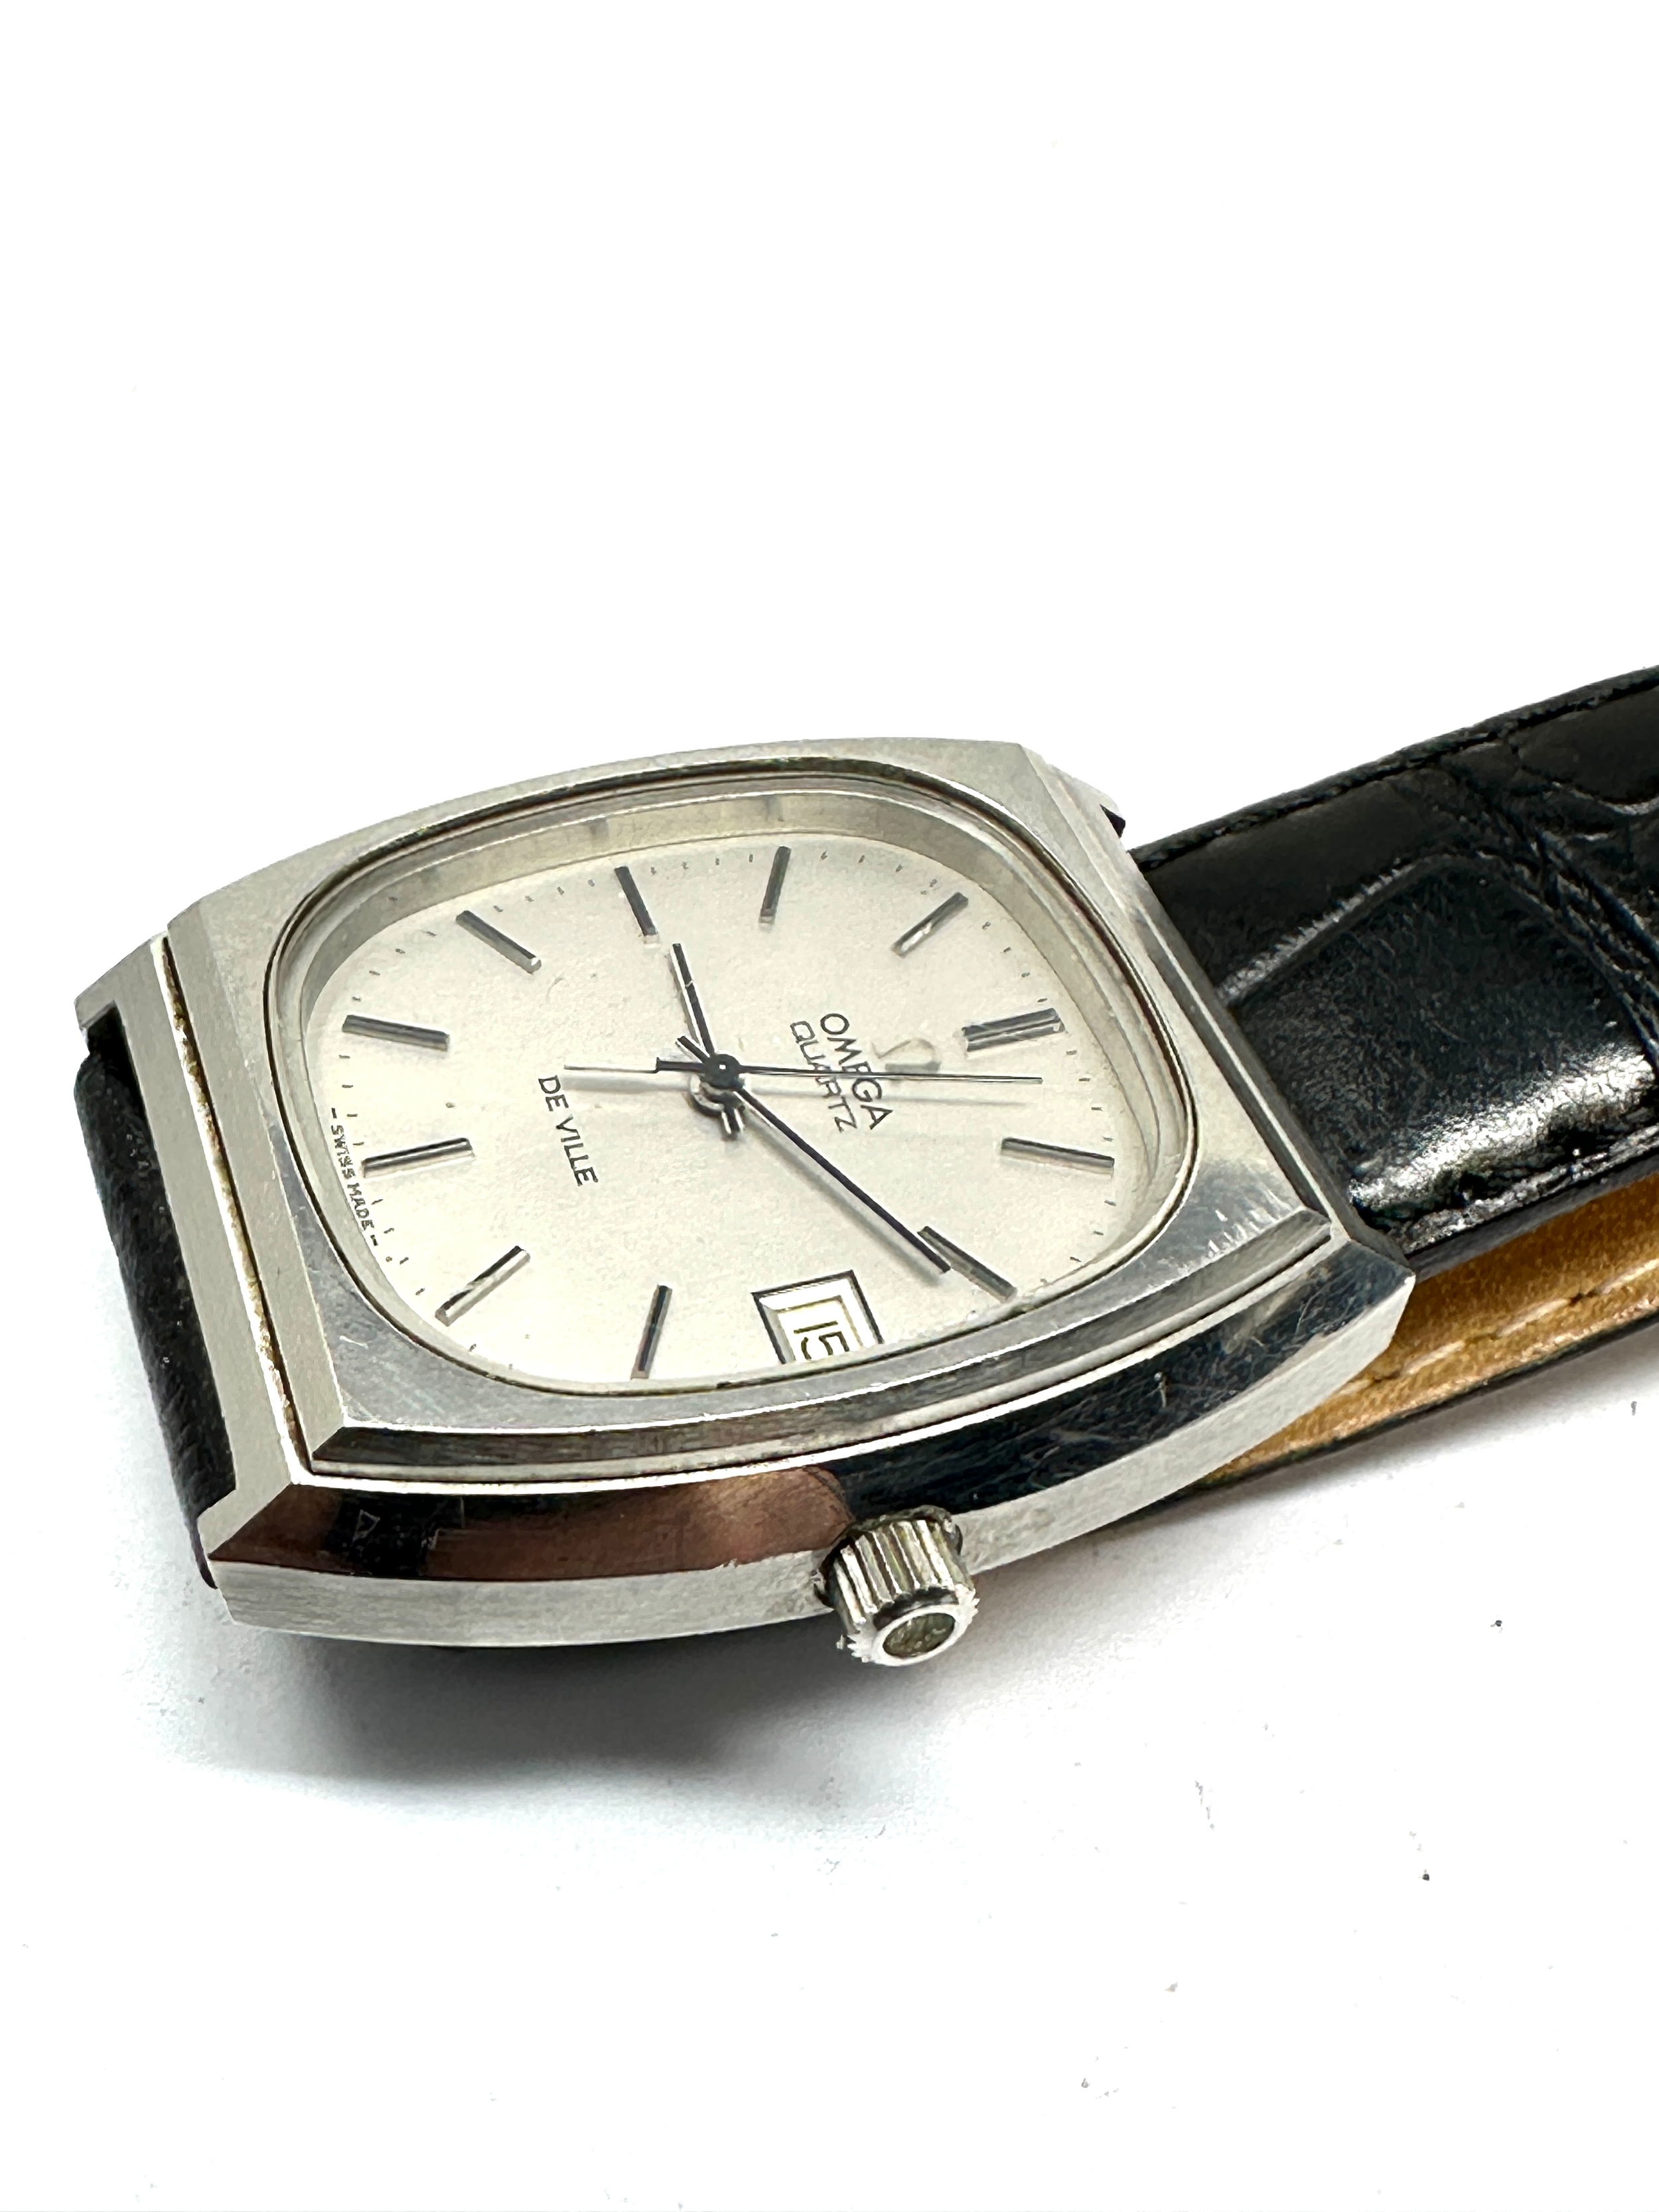 Vintage Gents Omega quartz Deville wrist watch the watch is not ticking possibly needs replacement - Image 2 of 3